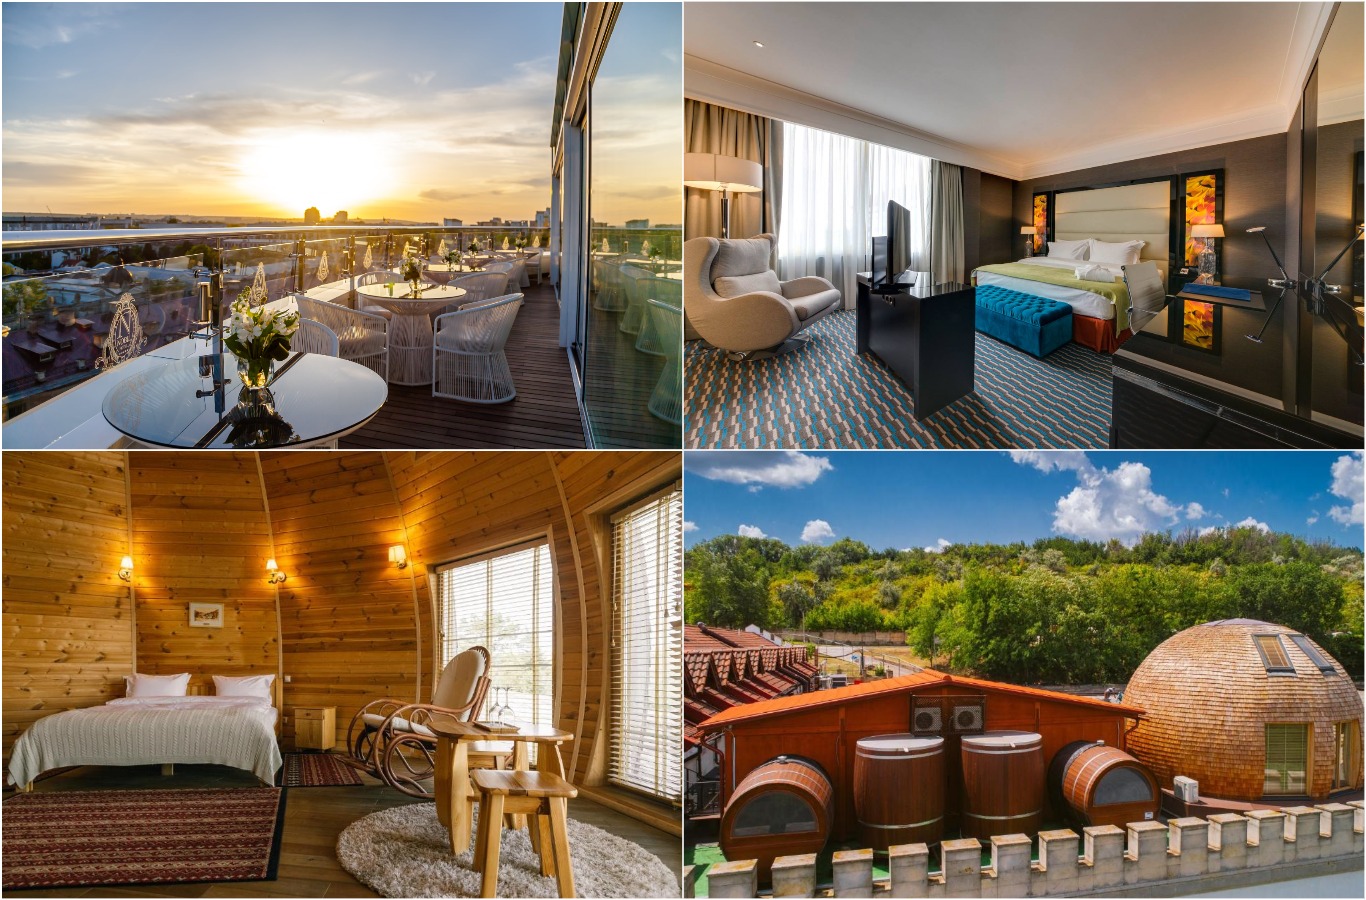 Discover Moldovan hotels that promise luxurious accommodations and unforgettable experiences